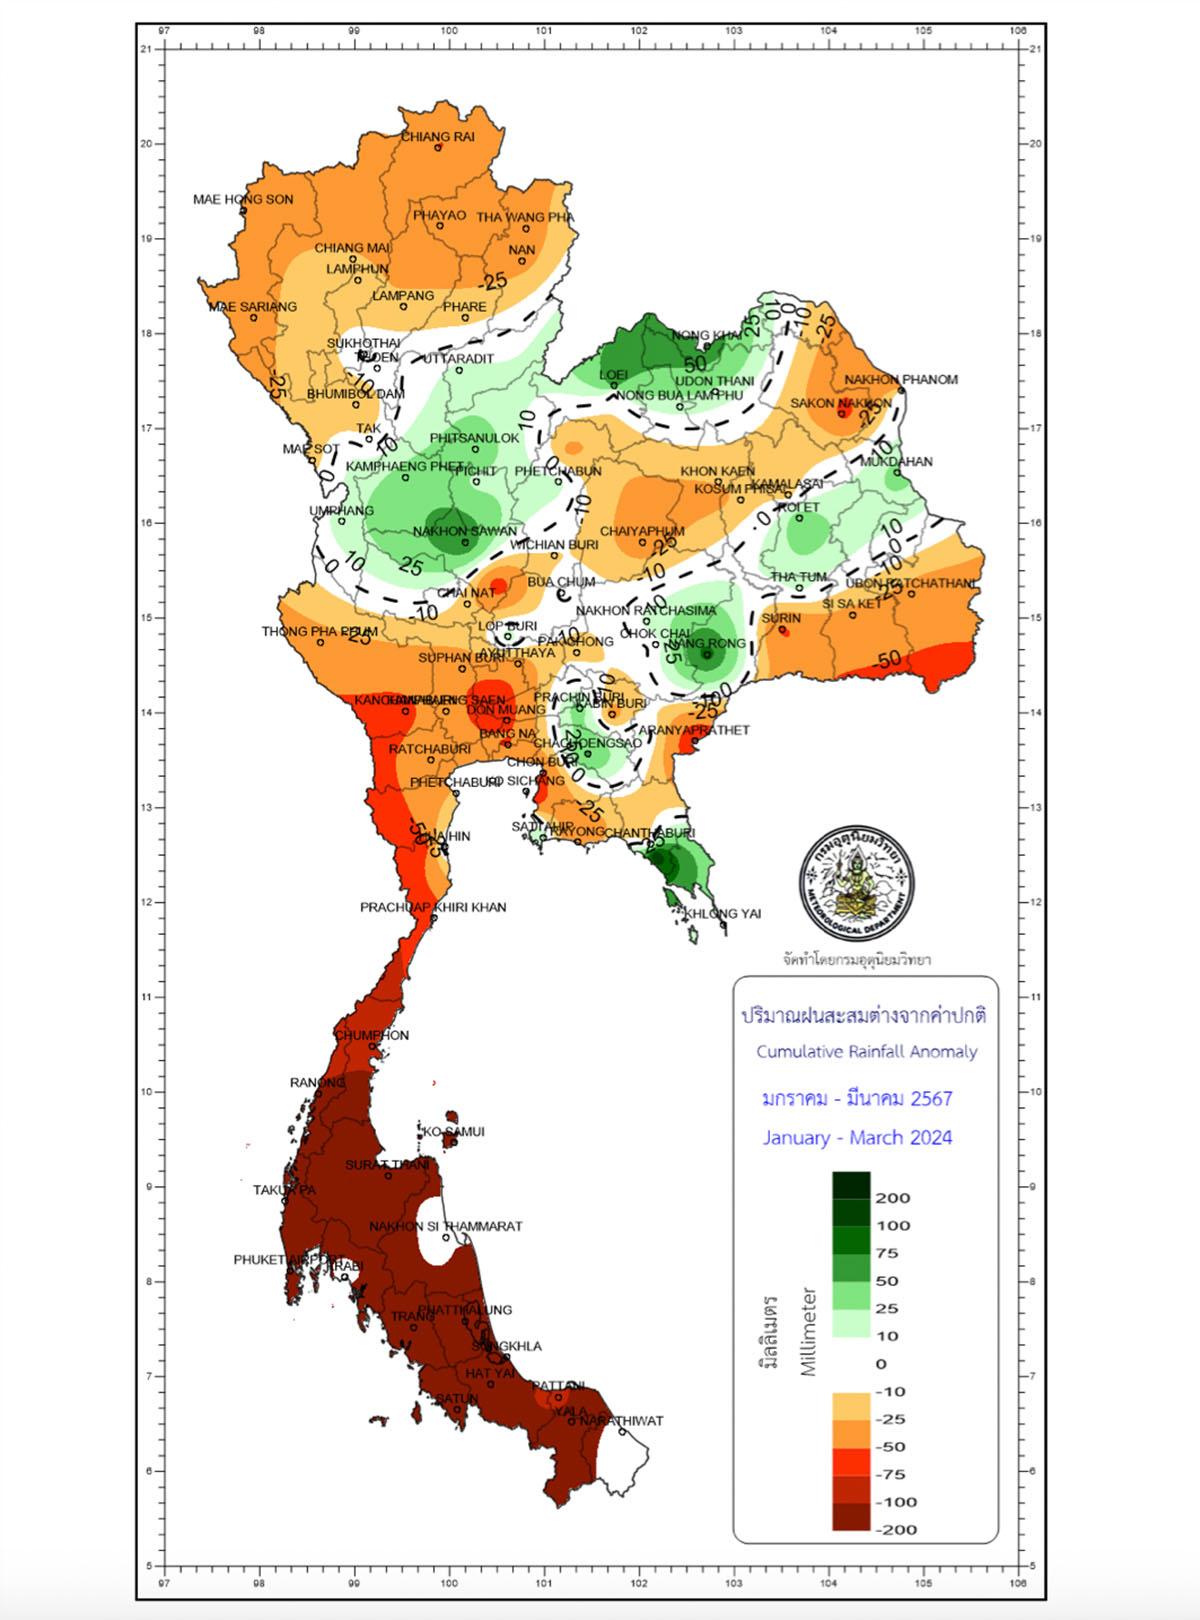 Heat-drought-have-been-rising-how-about-government-policies-and-people-adaptation-SPACEBAR-Photo02.jpg